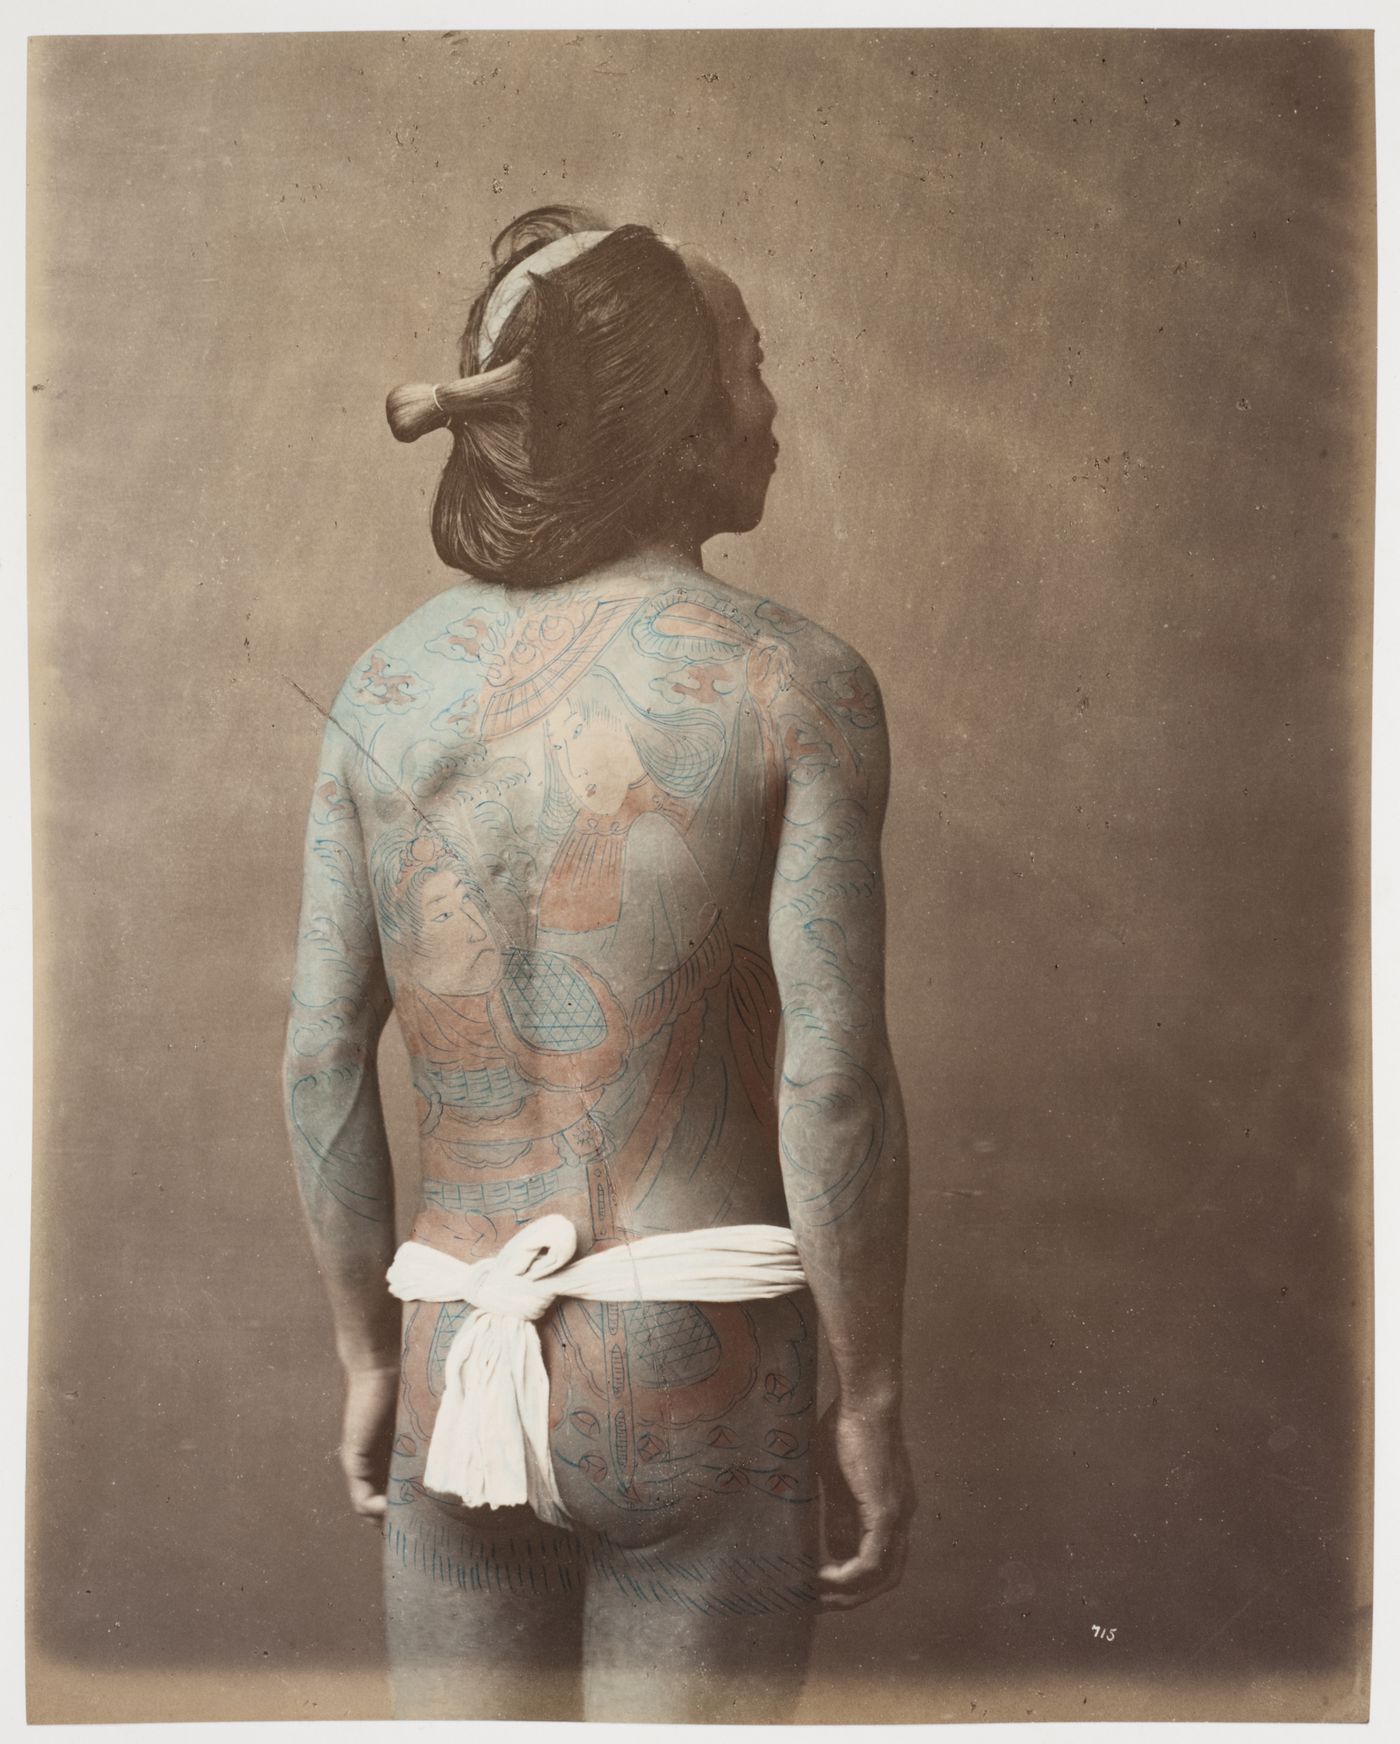 Portrait of a man showing tattoos on his back, Japan